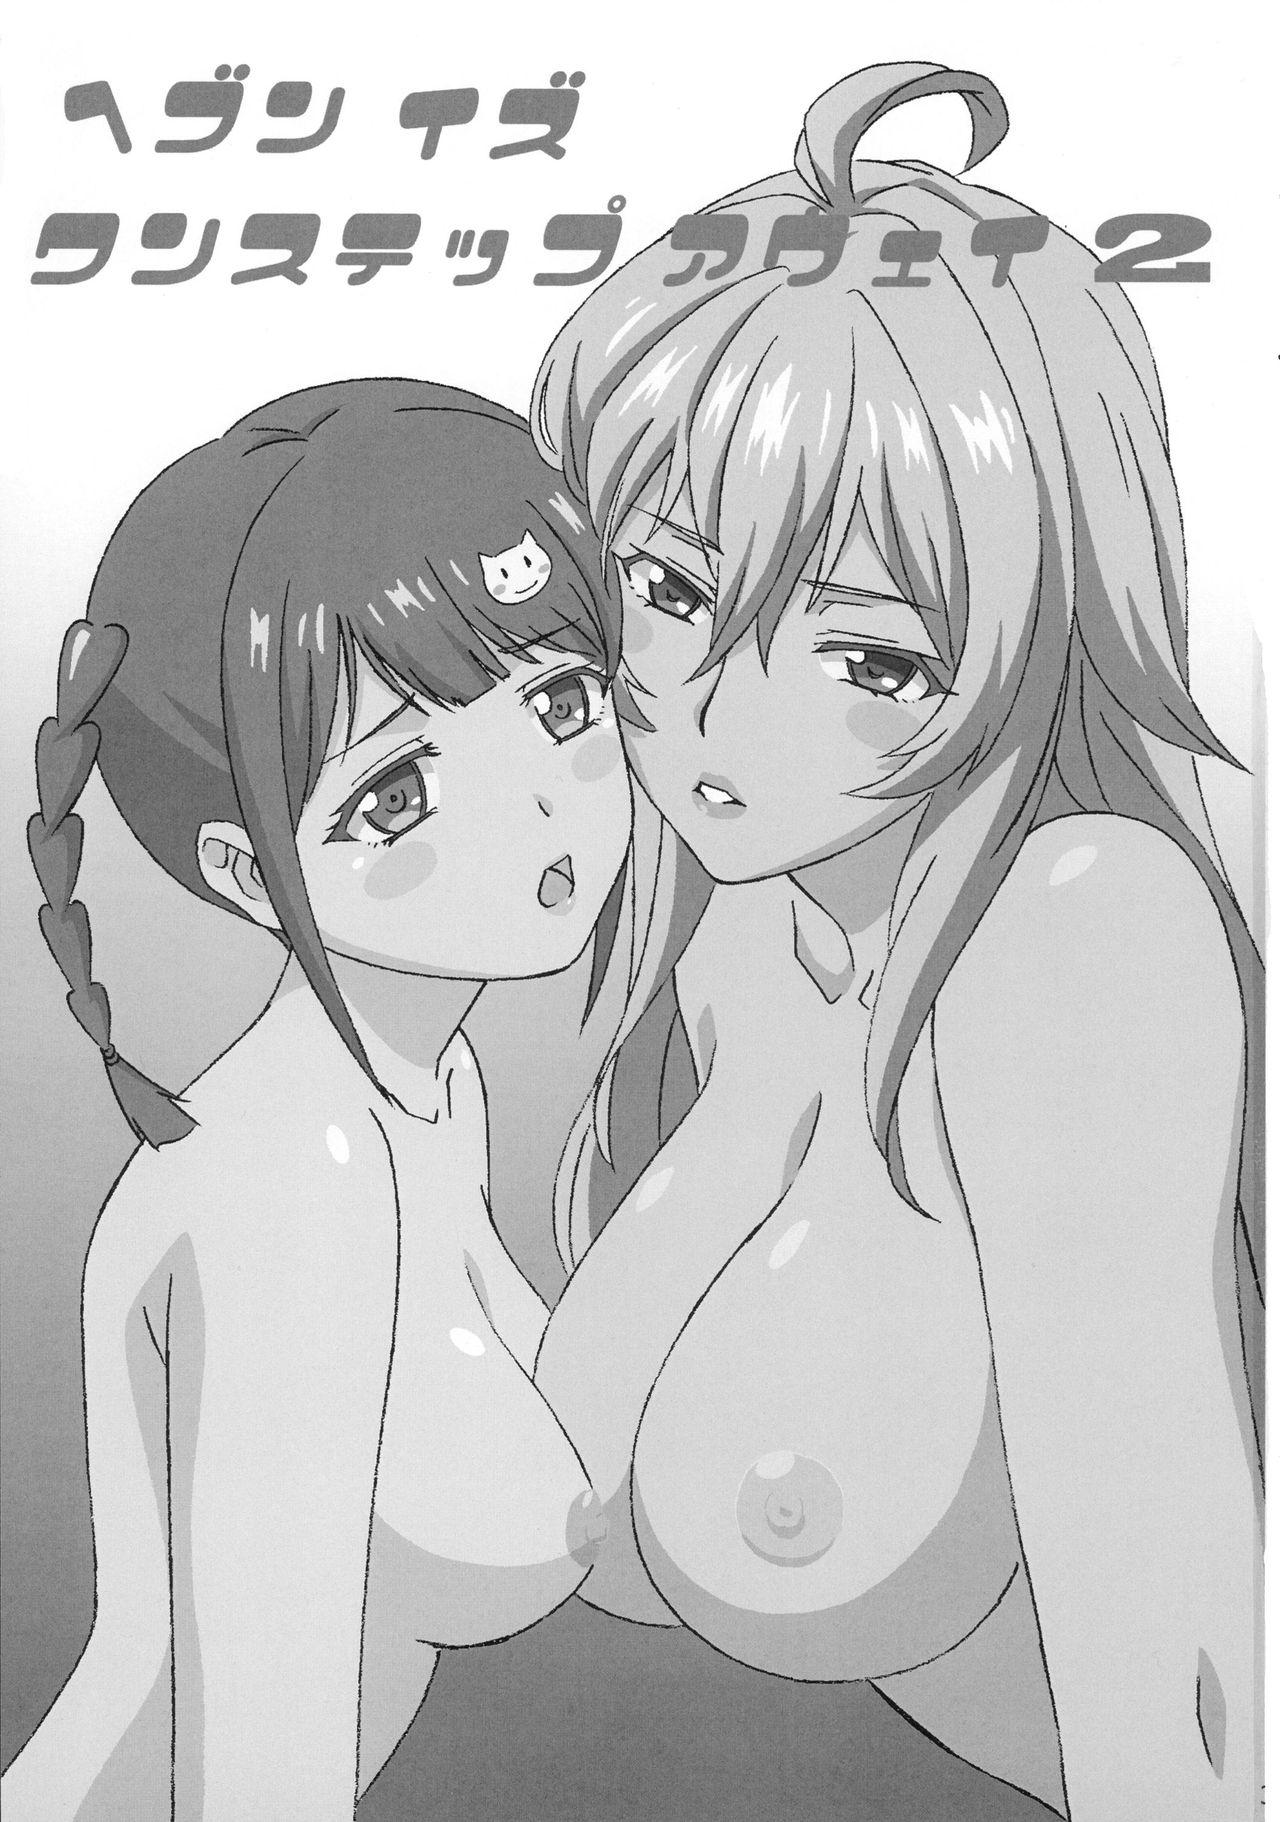 Moms Heaven is one step away 2 - Valkyrie drive Porra - Page 3